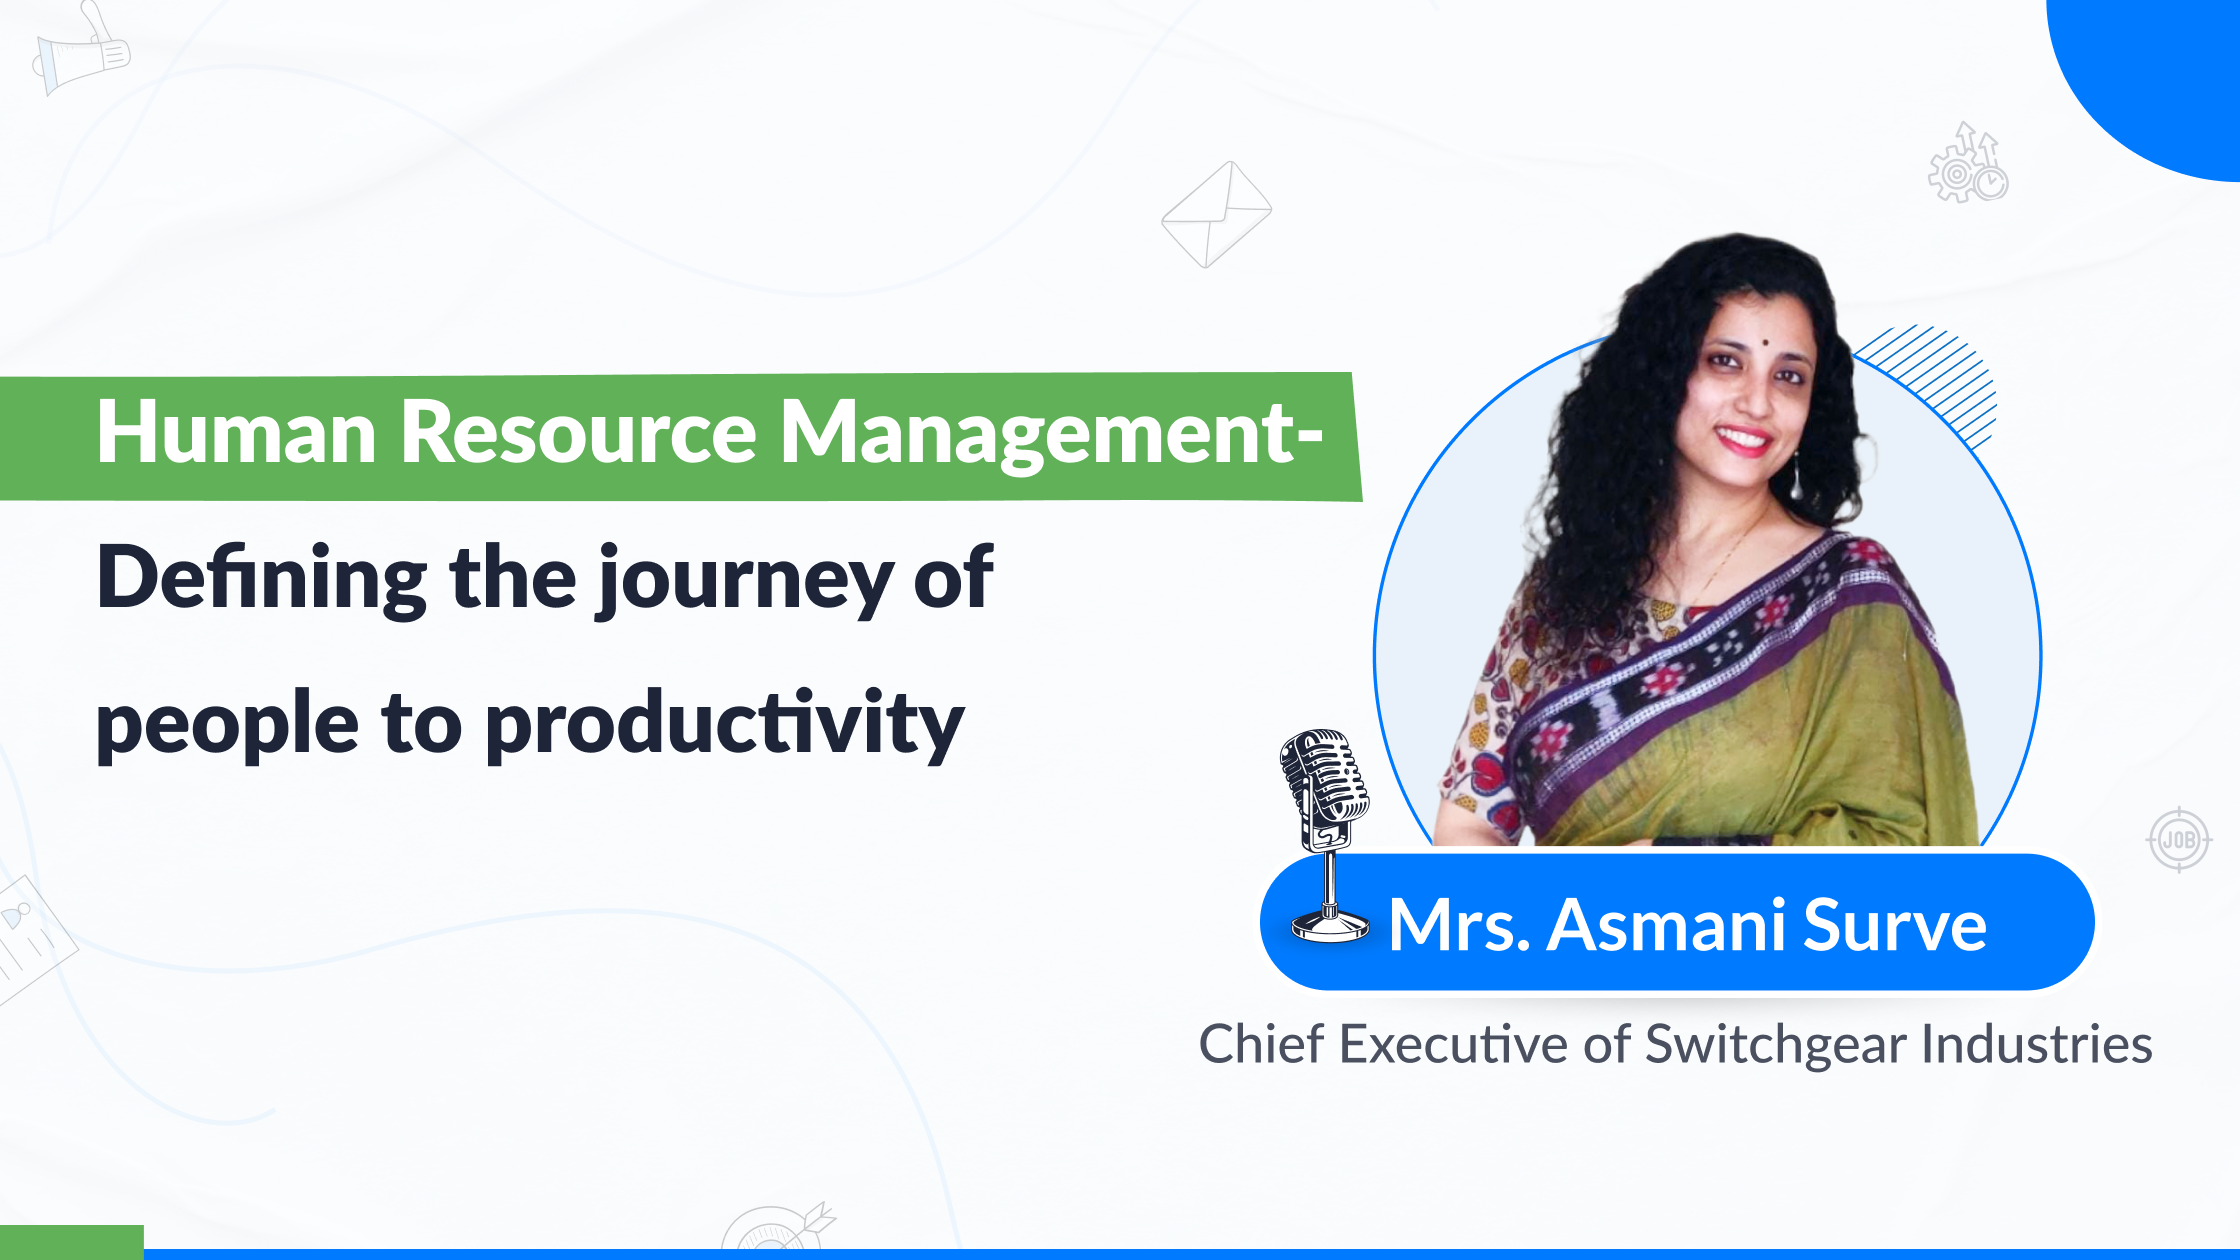 Human Resource Management Defining the journey of people to productivity